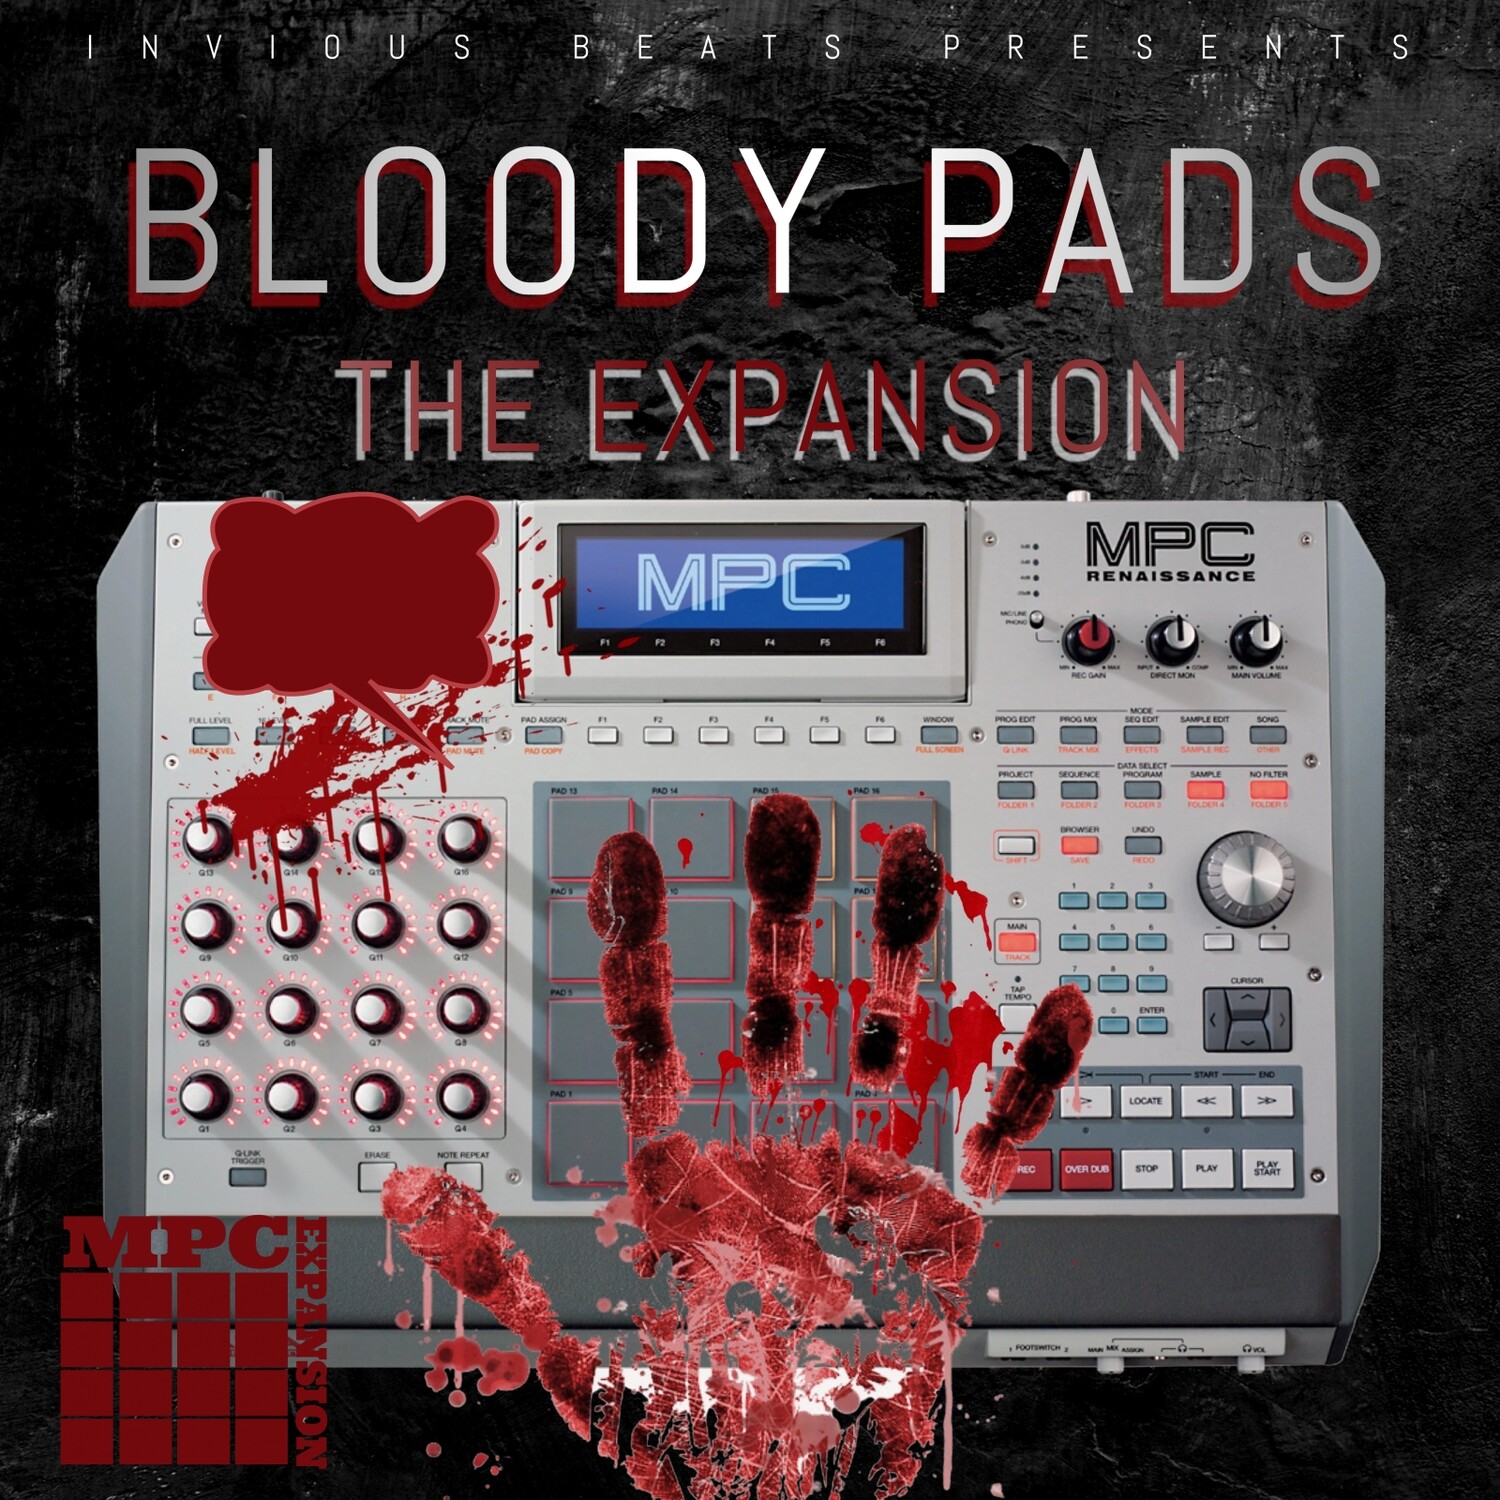 MPC EXPANSION 'BLOODY PADS' by INVIOUS